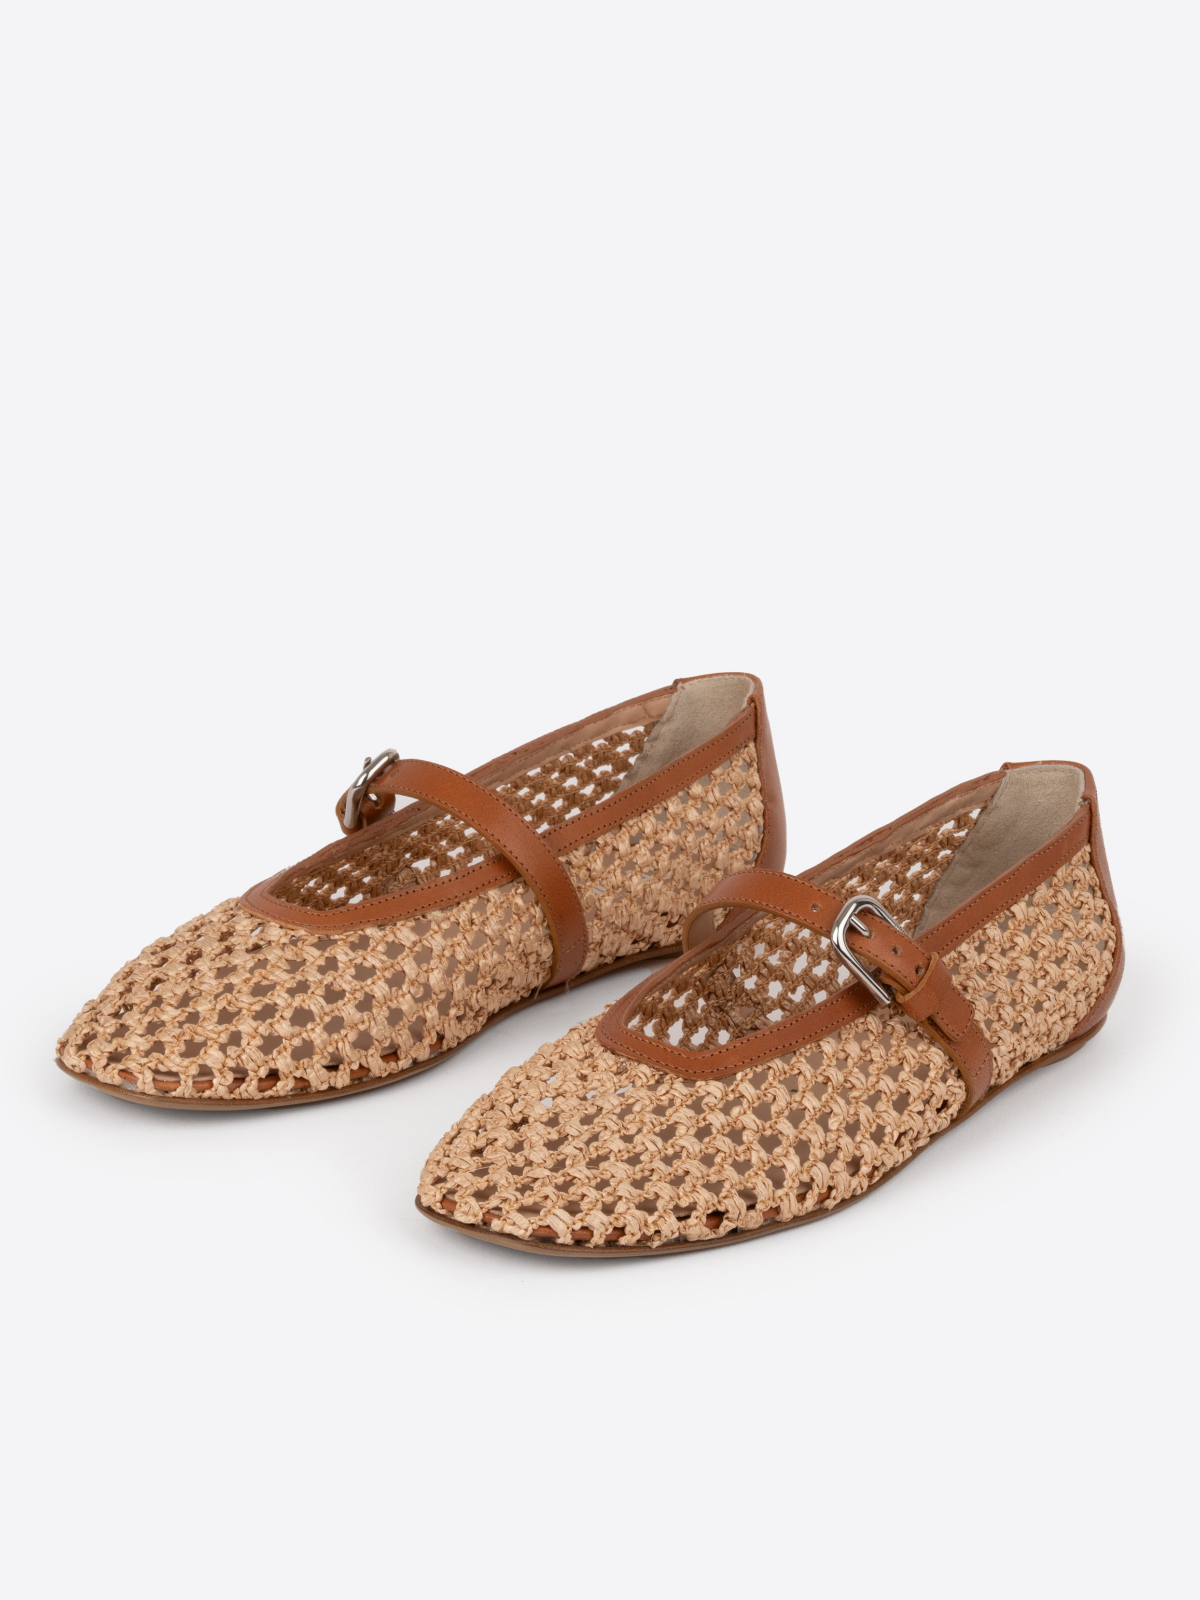 Beige Raffia Woven Square Toe Ballet Flats Mary Janes With Buckled Strap